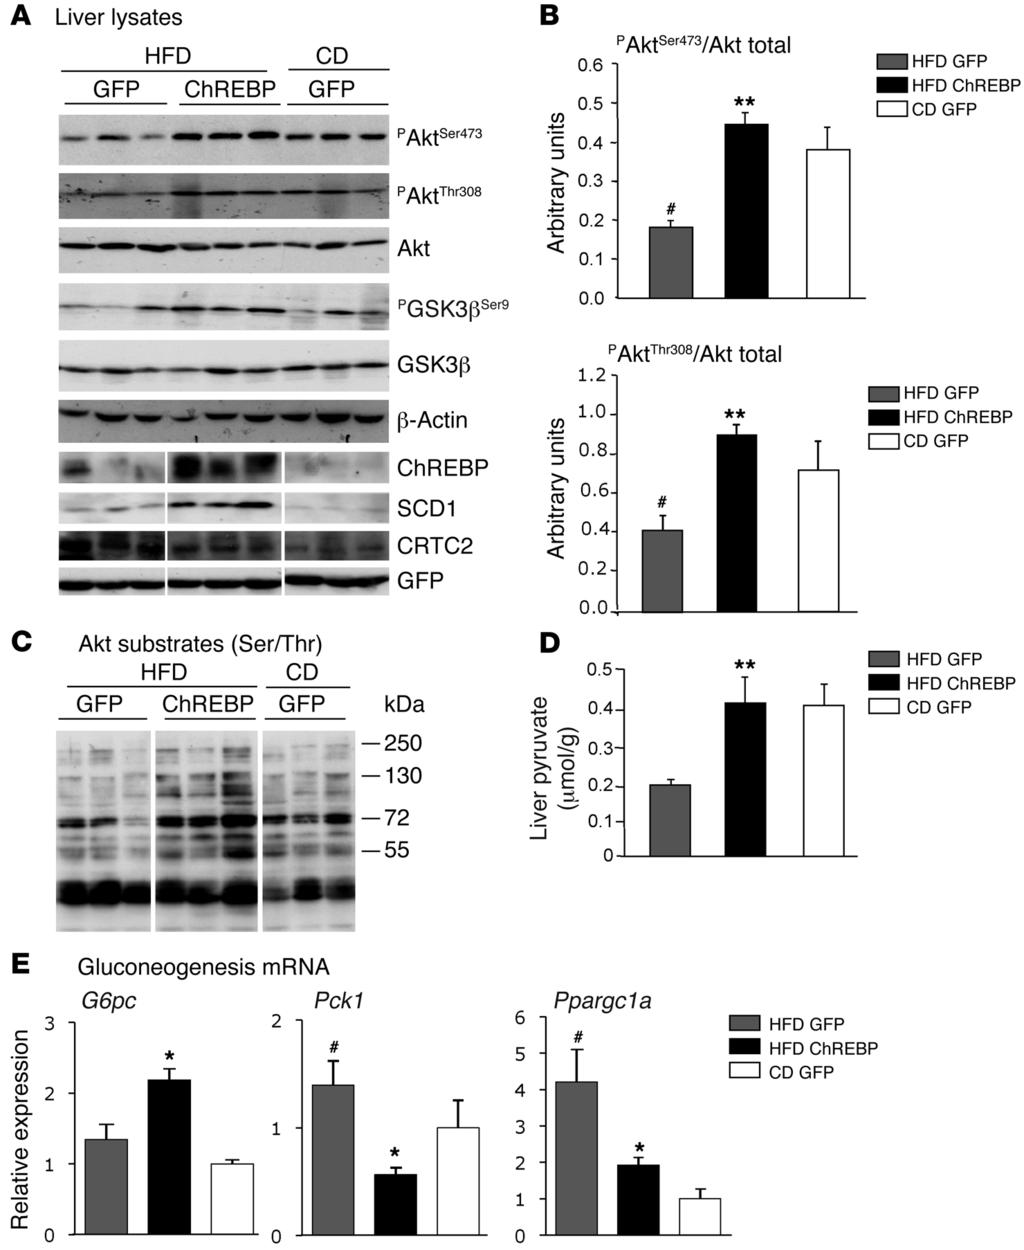 Figure 9 Improved Akt phosphorylation in livers of HFD-fed ChREBP mice. All analyses were carried out in HFD-fed GFP and ChREBP mice, as described in the Methods section.